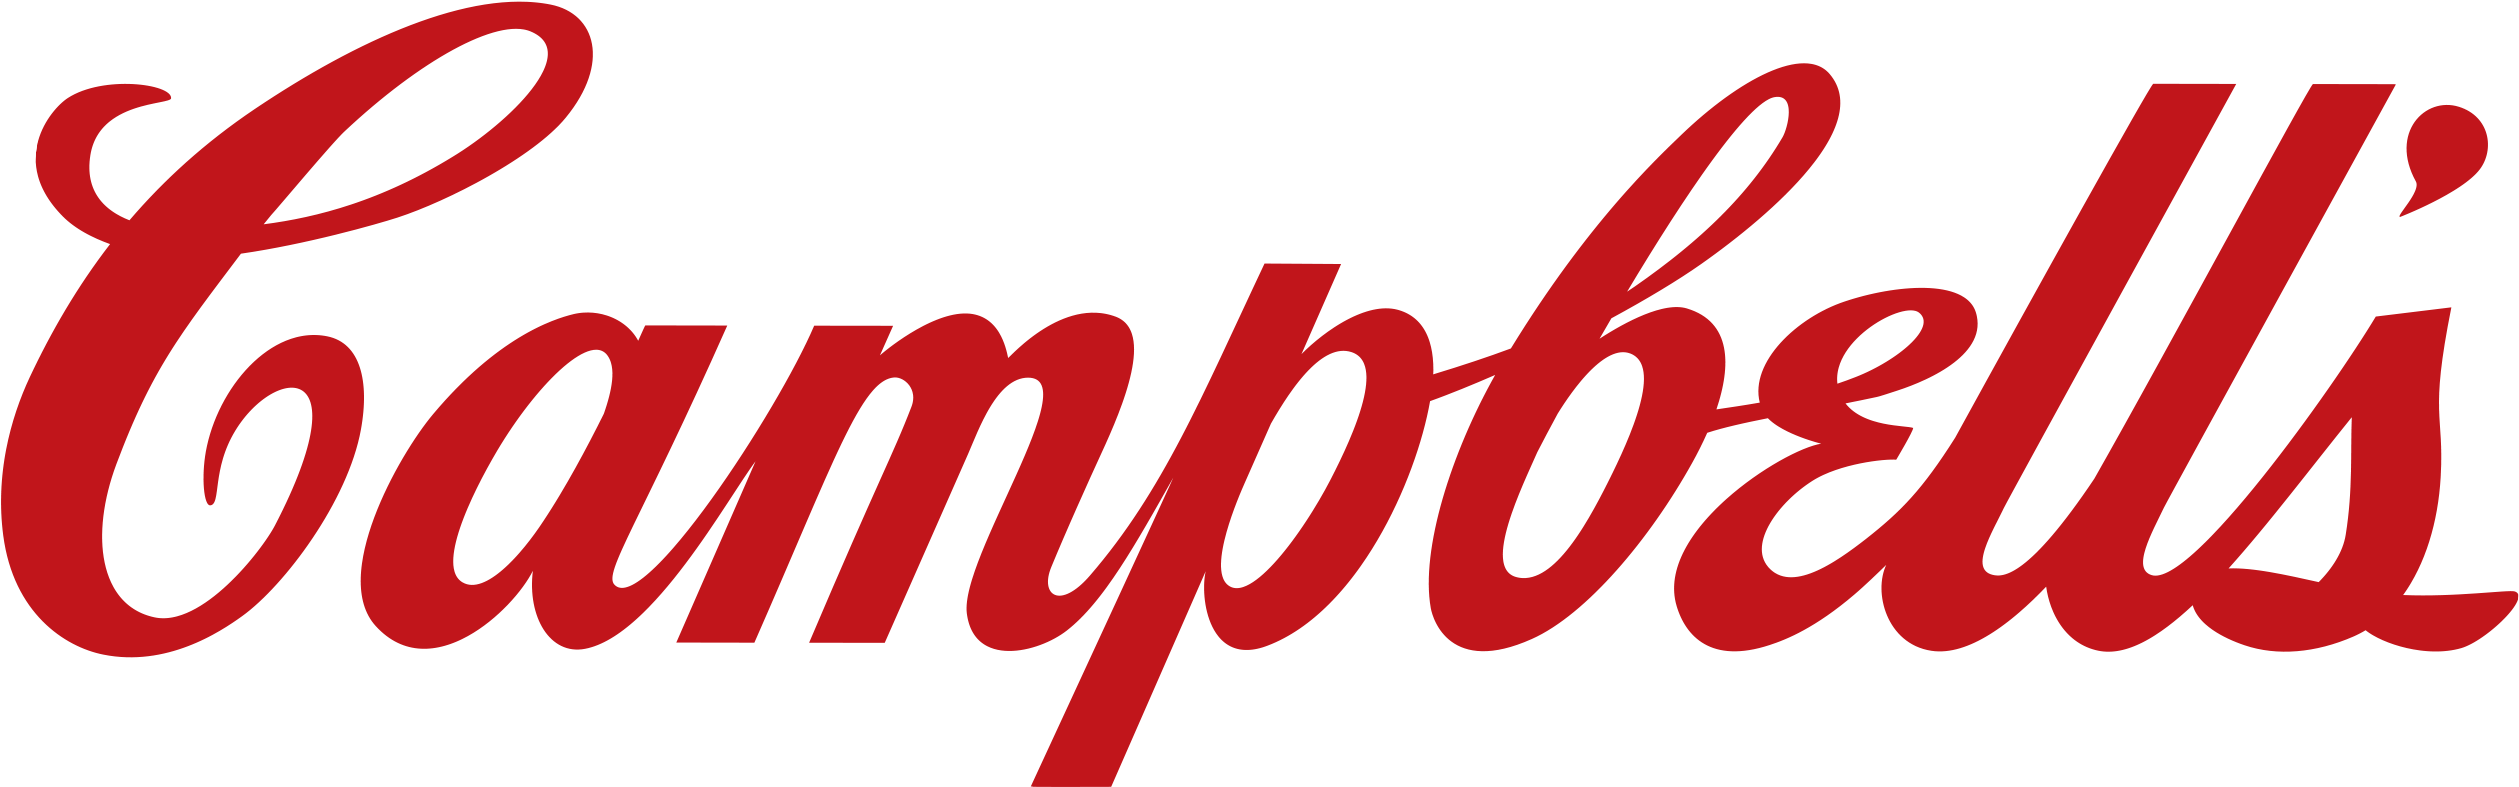 Campbell’s Logo PNG HD Quality